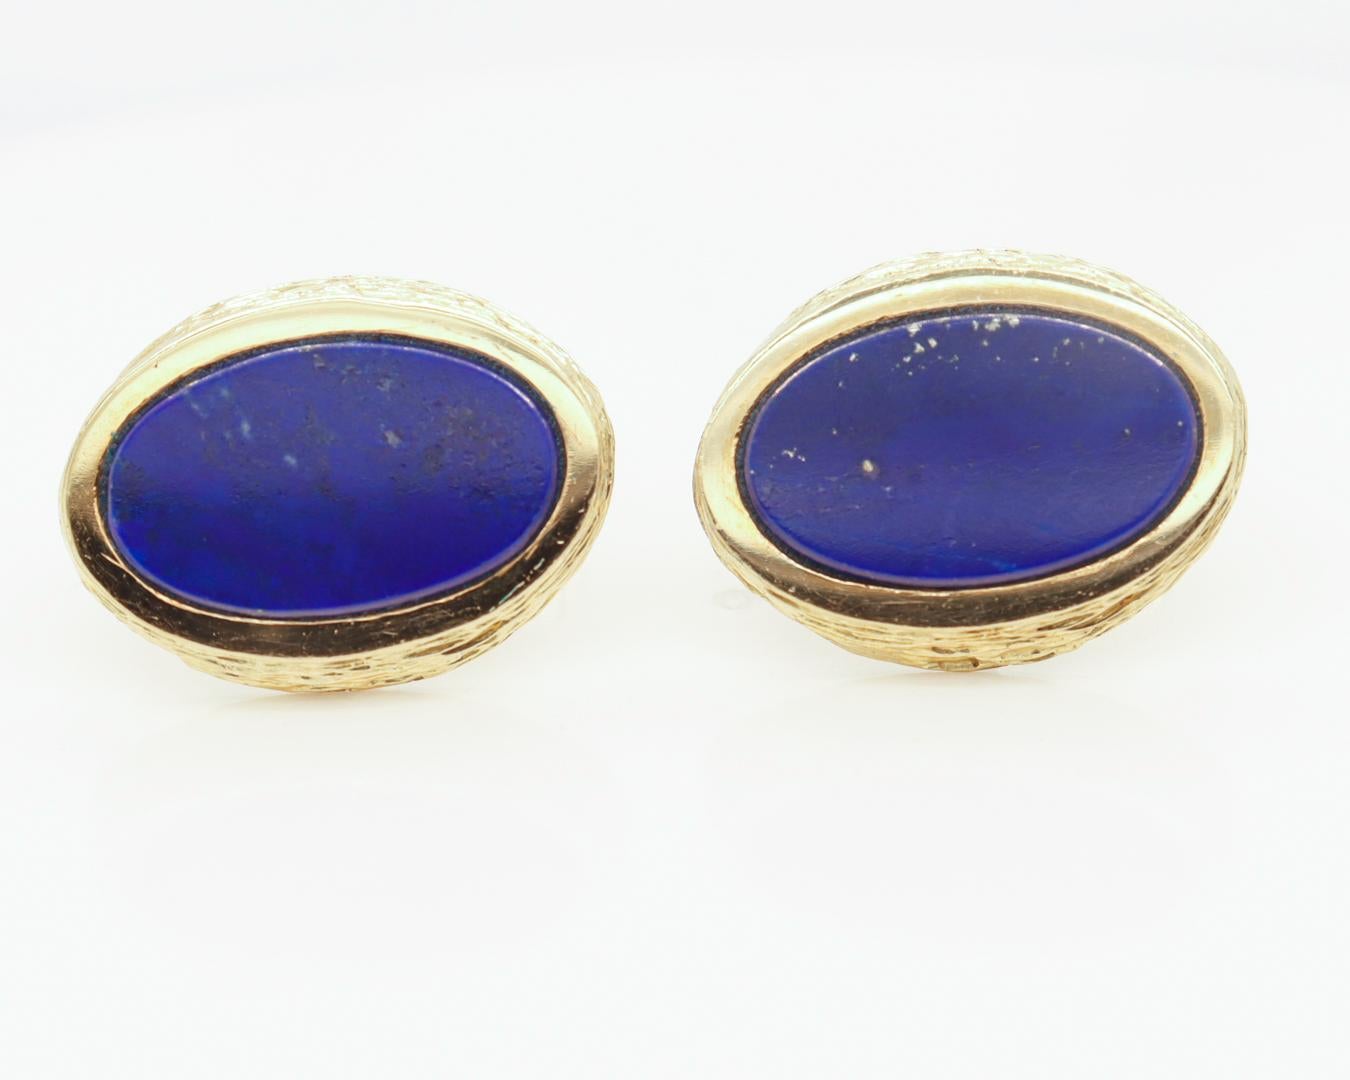 Pair of English Mid-Century Modern 18k Gold & Lapis Cufflinks by Kutchinsky For Sale 2